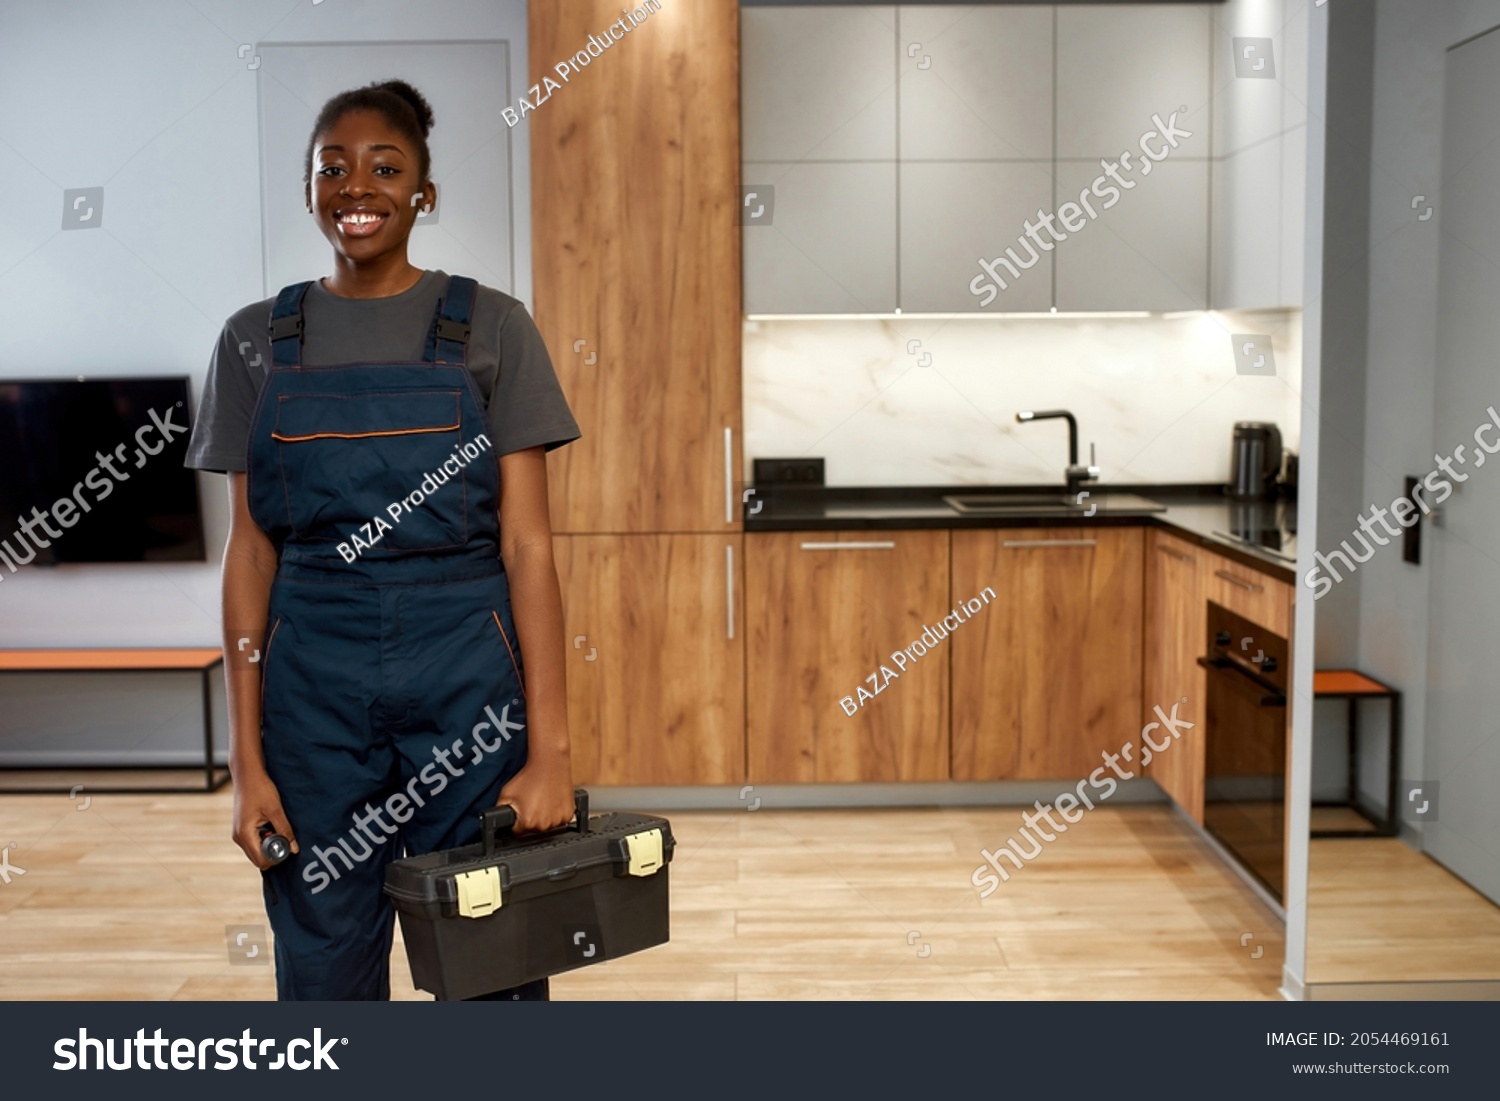 Indoor portrait of young smiling african american woman, professional technician or repairwoman posing in kitchen, holding toolkit. Female home repair service worker. Modern kitchen on background. #2054469161